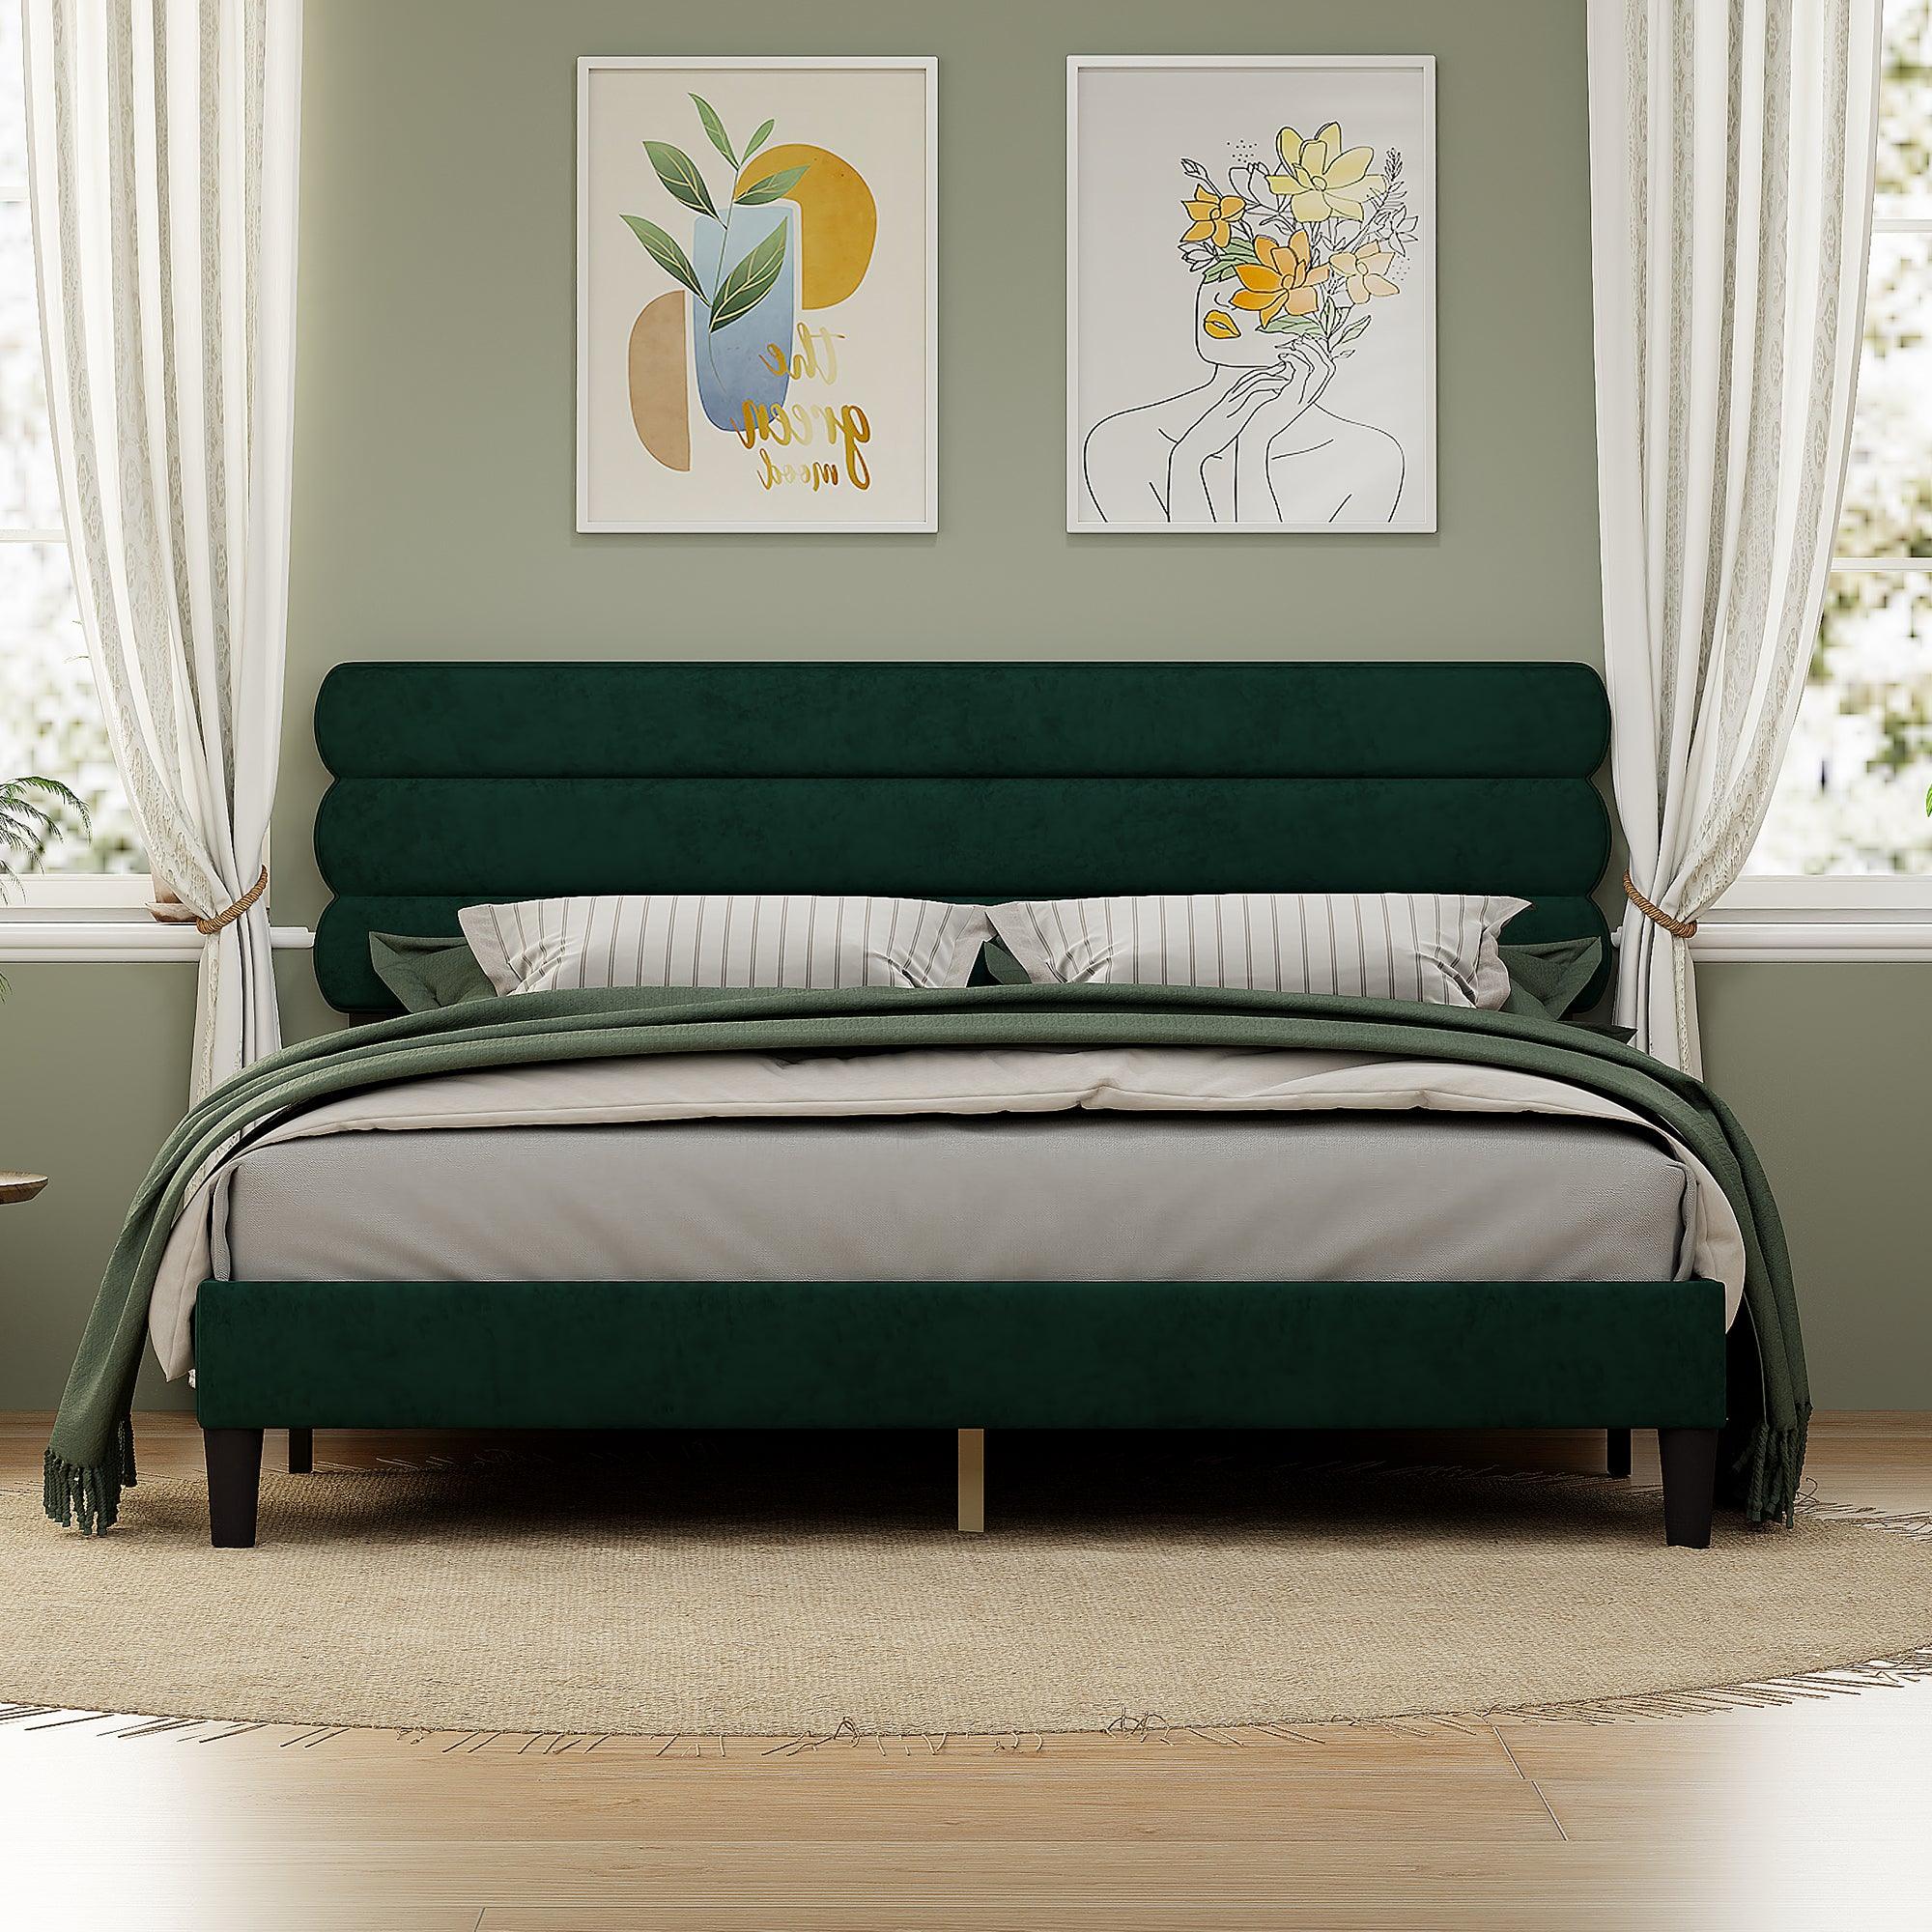 🆓🚛 King Bed Frame With Headboard, Sturdy Platform Bed With Wooden Slats Support, Green